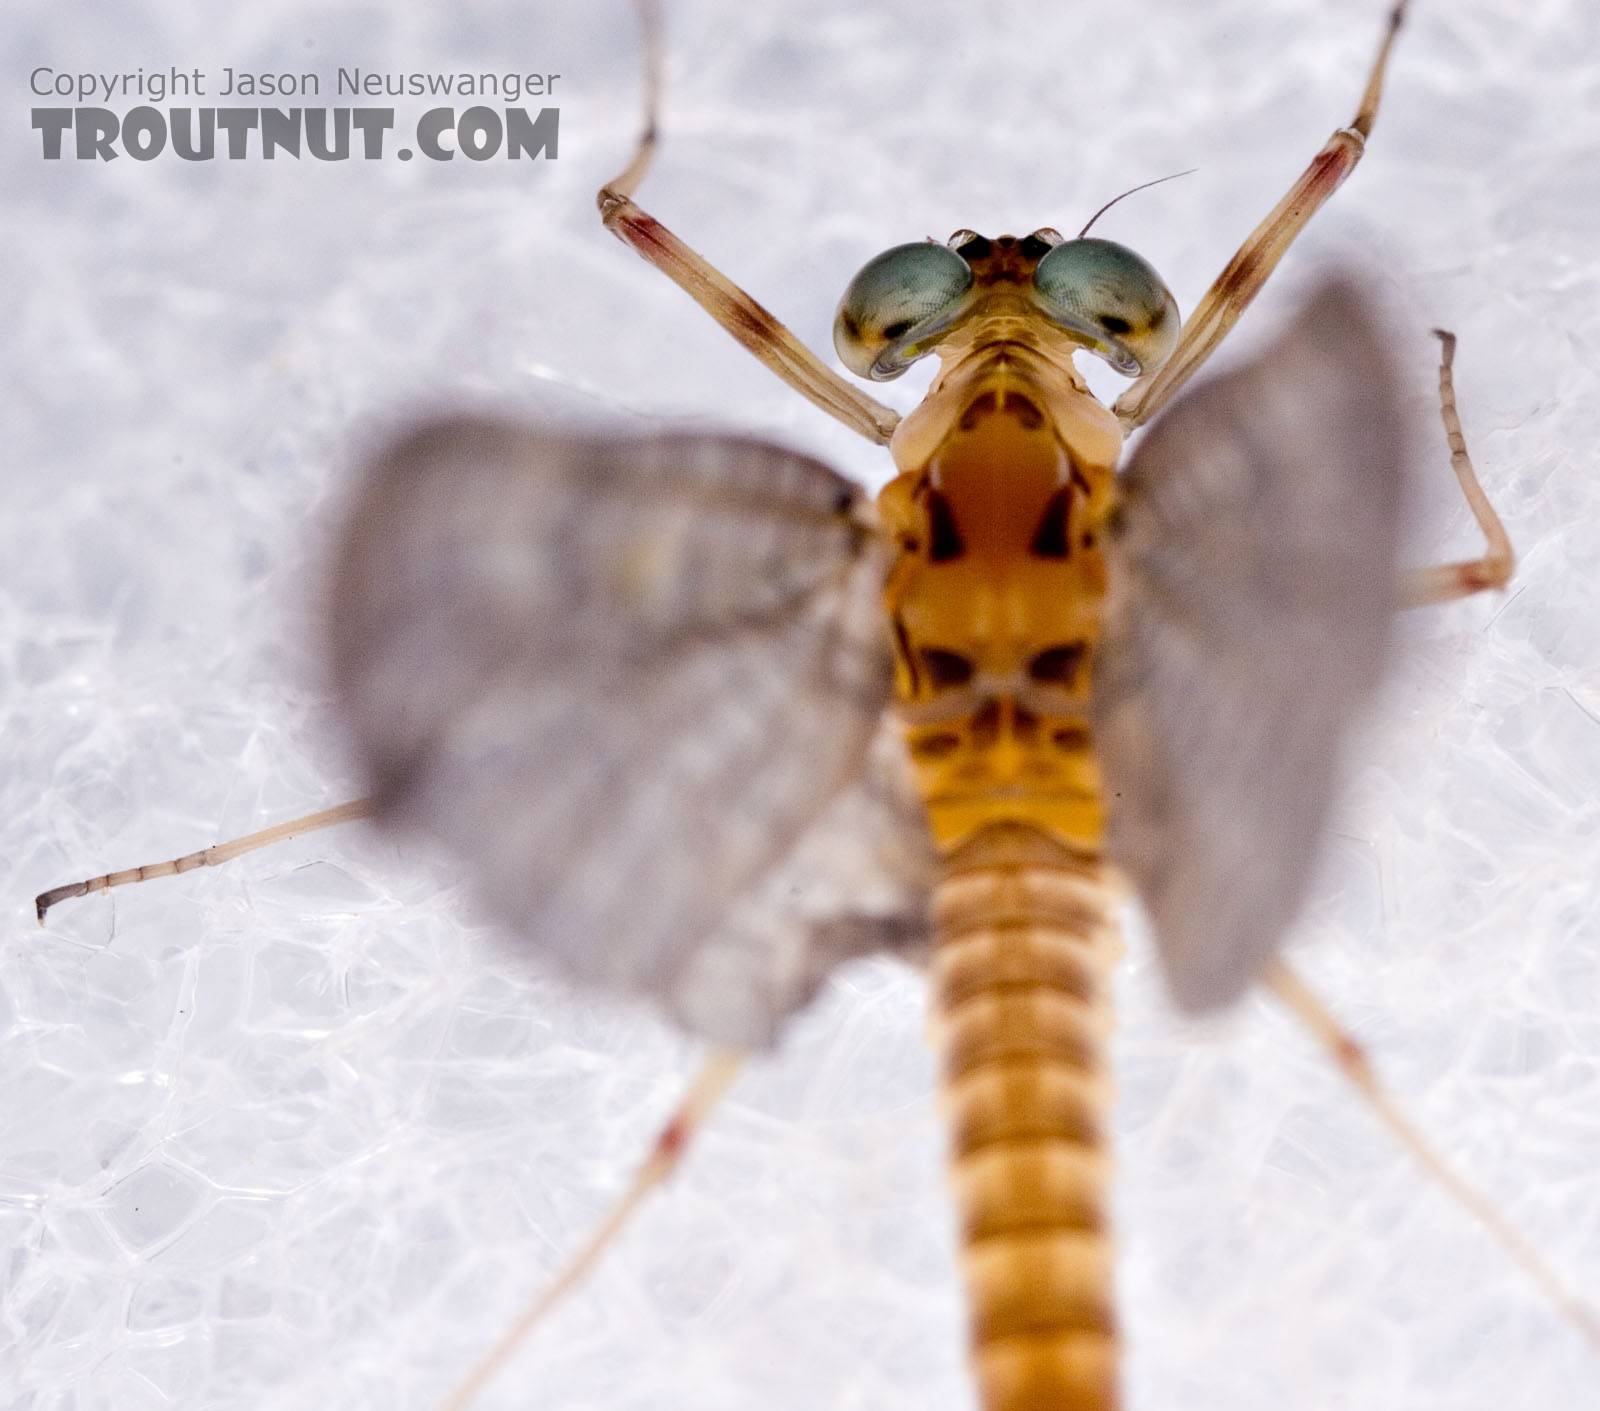 Male Maccaffertium ithaca (Light Cahill) Mayfly Dun from the West Branch of the Delaware River in New York